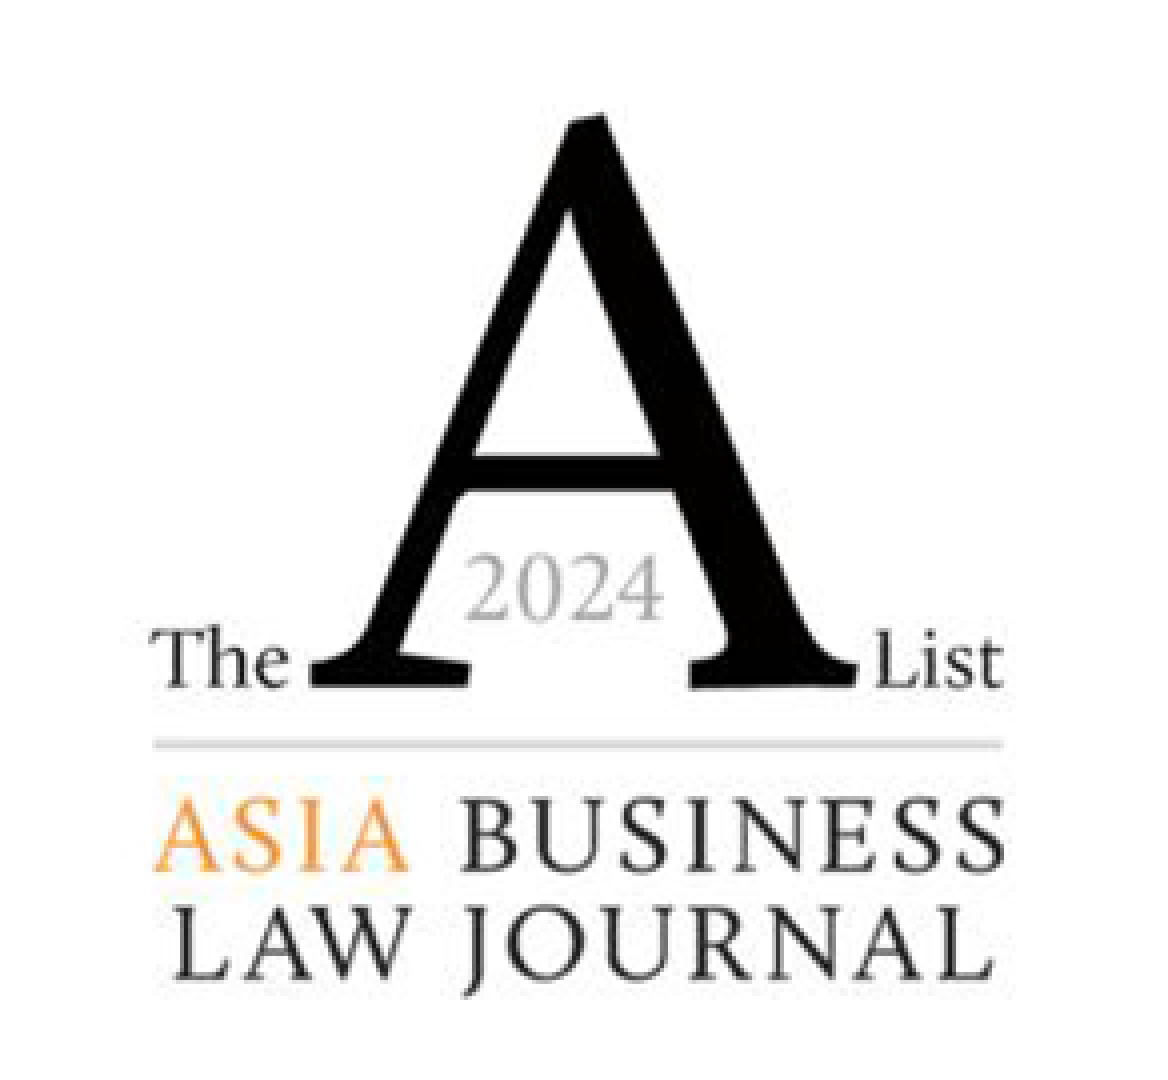 HFM Asian Services Awards 2023 - Best Offshore Law Firm